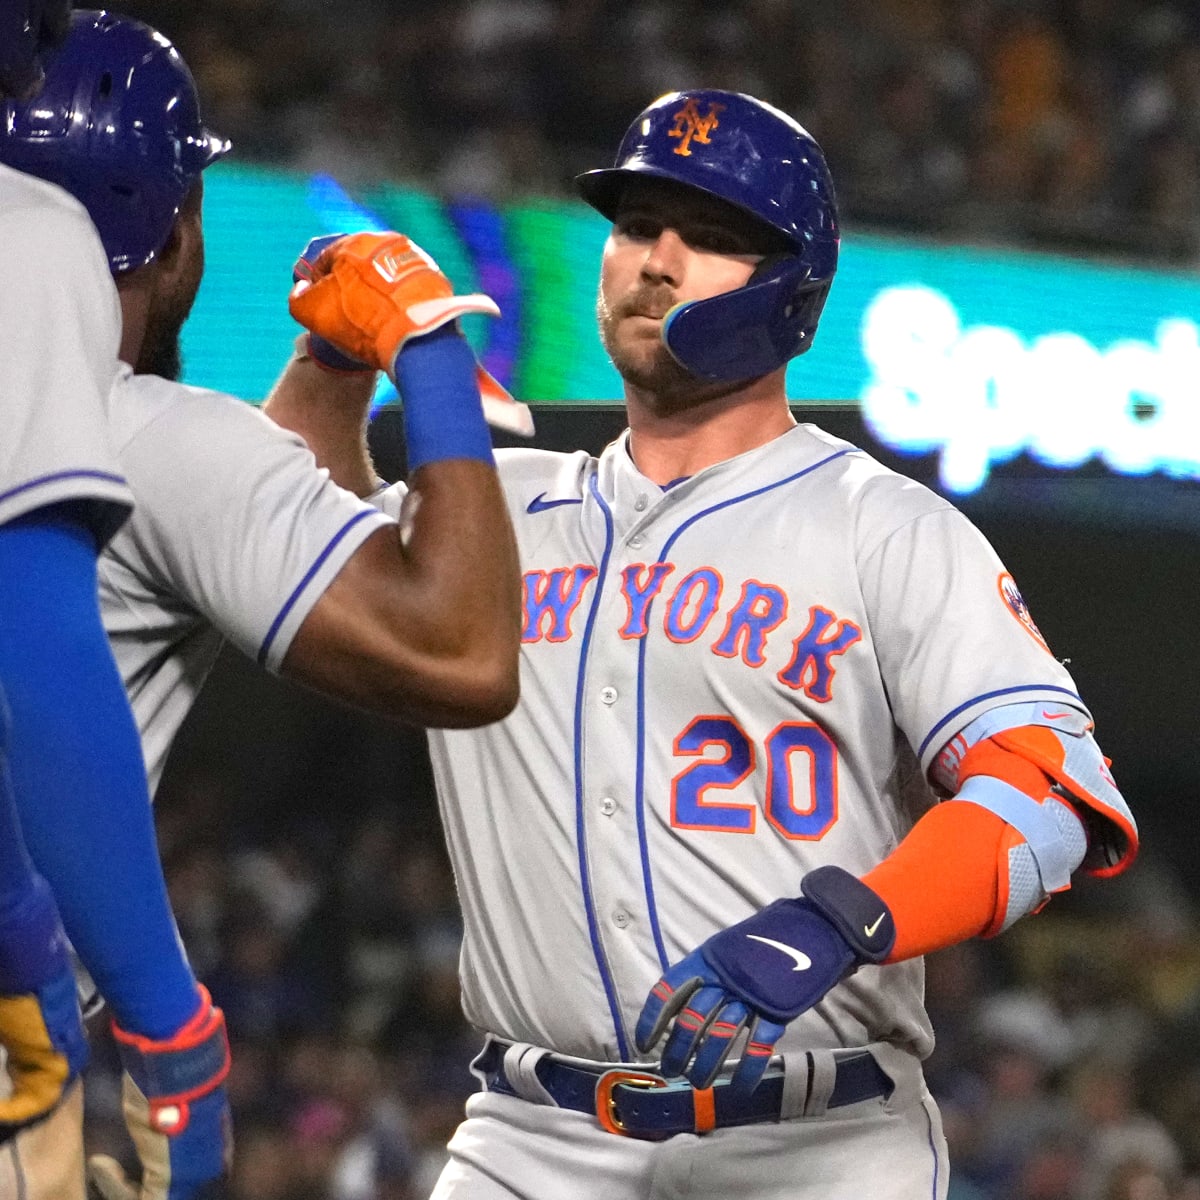 Mets' Alonso Uses Home Run Derby As Jumping Off Point for Charity